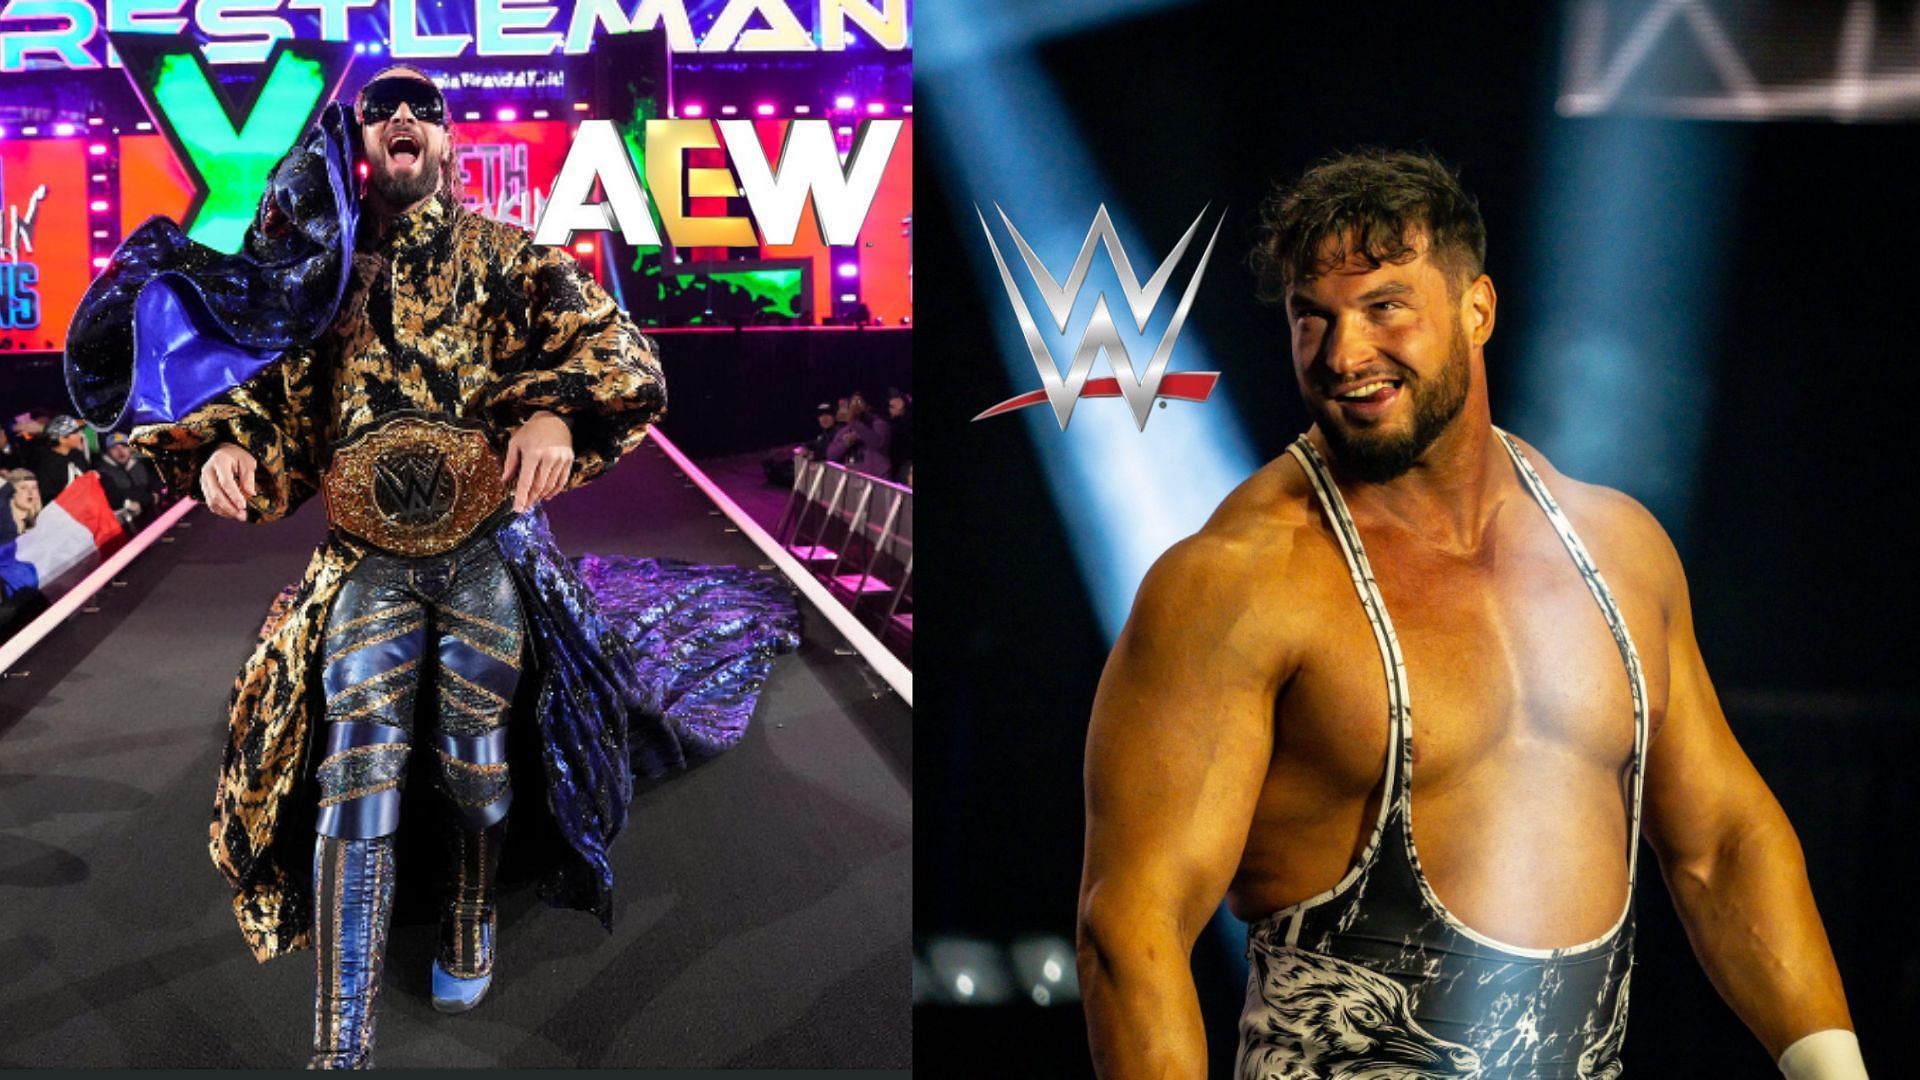 WWE and AEW have exchanged several top stars recently [Image Credits: X profiles of AEW and Wardlow, WWE